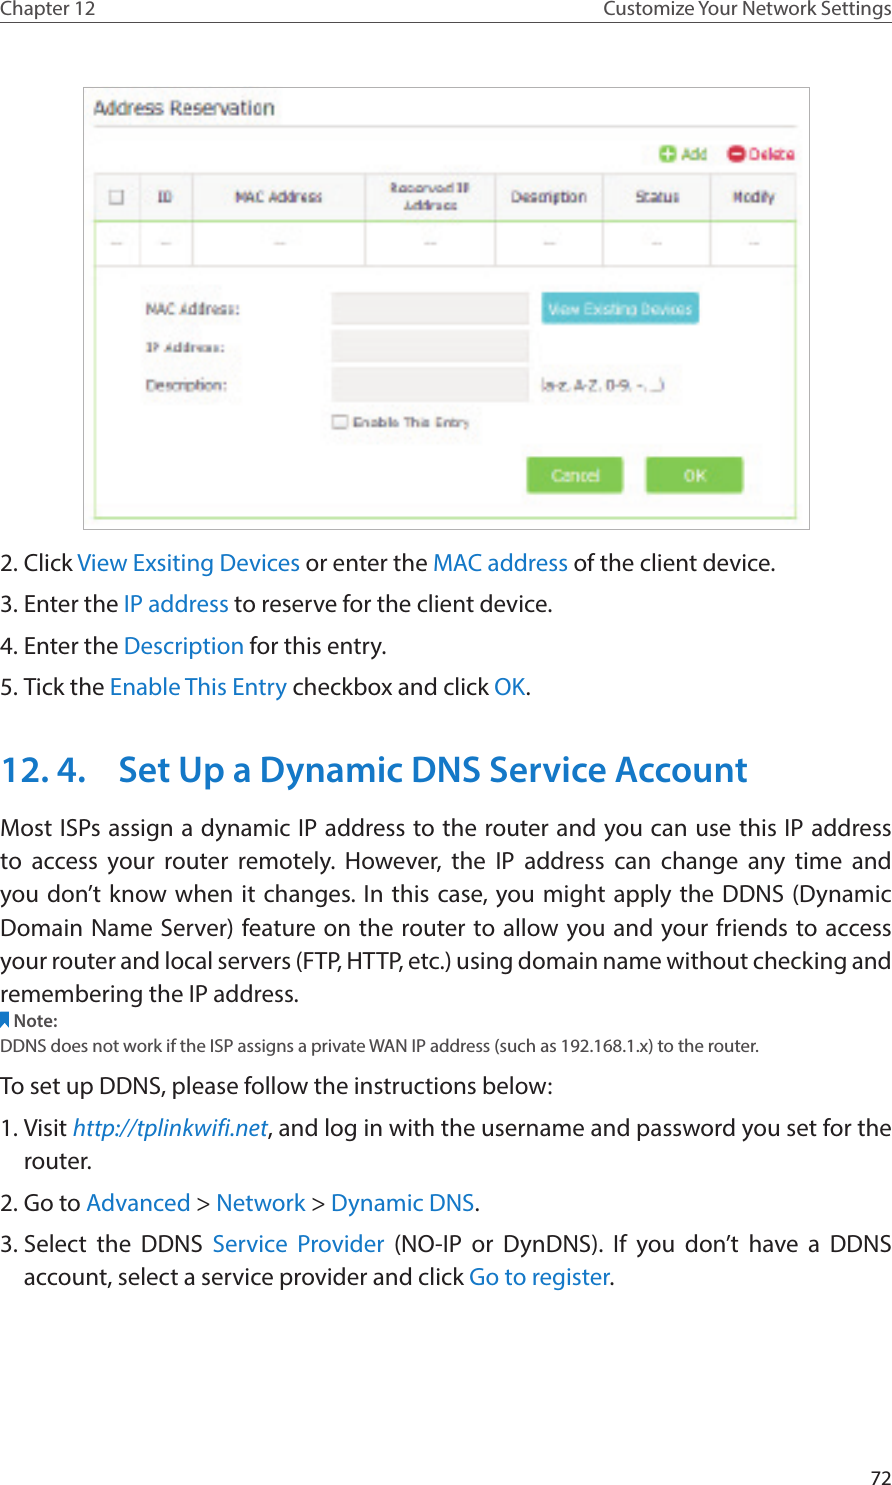 72Chapter 12 Customize Your Network Settings2. Click View Exsiting Devices or enter the MAC address of the client device.3. Enter the IP address to reserve for the client device.4. Enter the Description for this entry.5. Tick the Enable This Entry checkbox and click OK. 12. 4.  Set Up a Dynamic DNS Service AccountMost ISPs assign a dynamic IP address to the router and you can use this IP address to access your router remotely. However, the IP address can change any time and you don’t know when it changes. In this case, you might apply the DDNS (Dynamic Domain Name Server) feature on the router to allow you and your friends to access your router and local servers (FTP, HTTP, etc.) using domain name without checking and remembering the IP address. Note: DDNS does not work if the ISP assigns a private WAN IP address (such as 192.168.1.x) to the router. To set up DDNS, please follow the instructions below:1. Visit http://tplinkwifi.net, and log in with the username and password you set for the router.2. Go to Advanced &gt; Network &gt; Dynamic DNS.3. Select the DDNS Service Provider (NO-IP or DynDNS). If you don’t have a DDNS account, select a service provider and click Go to register.